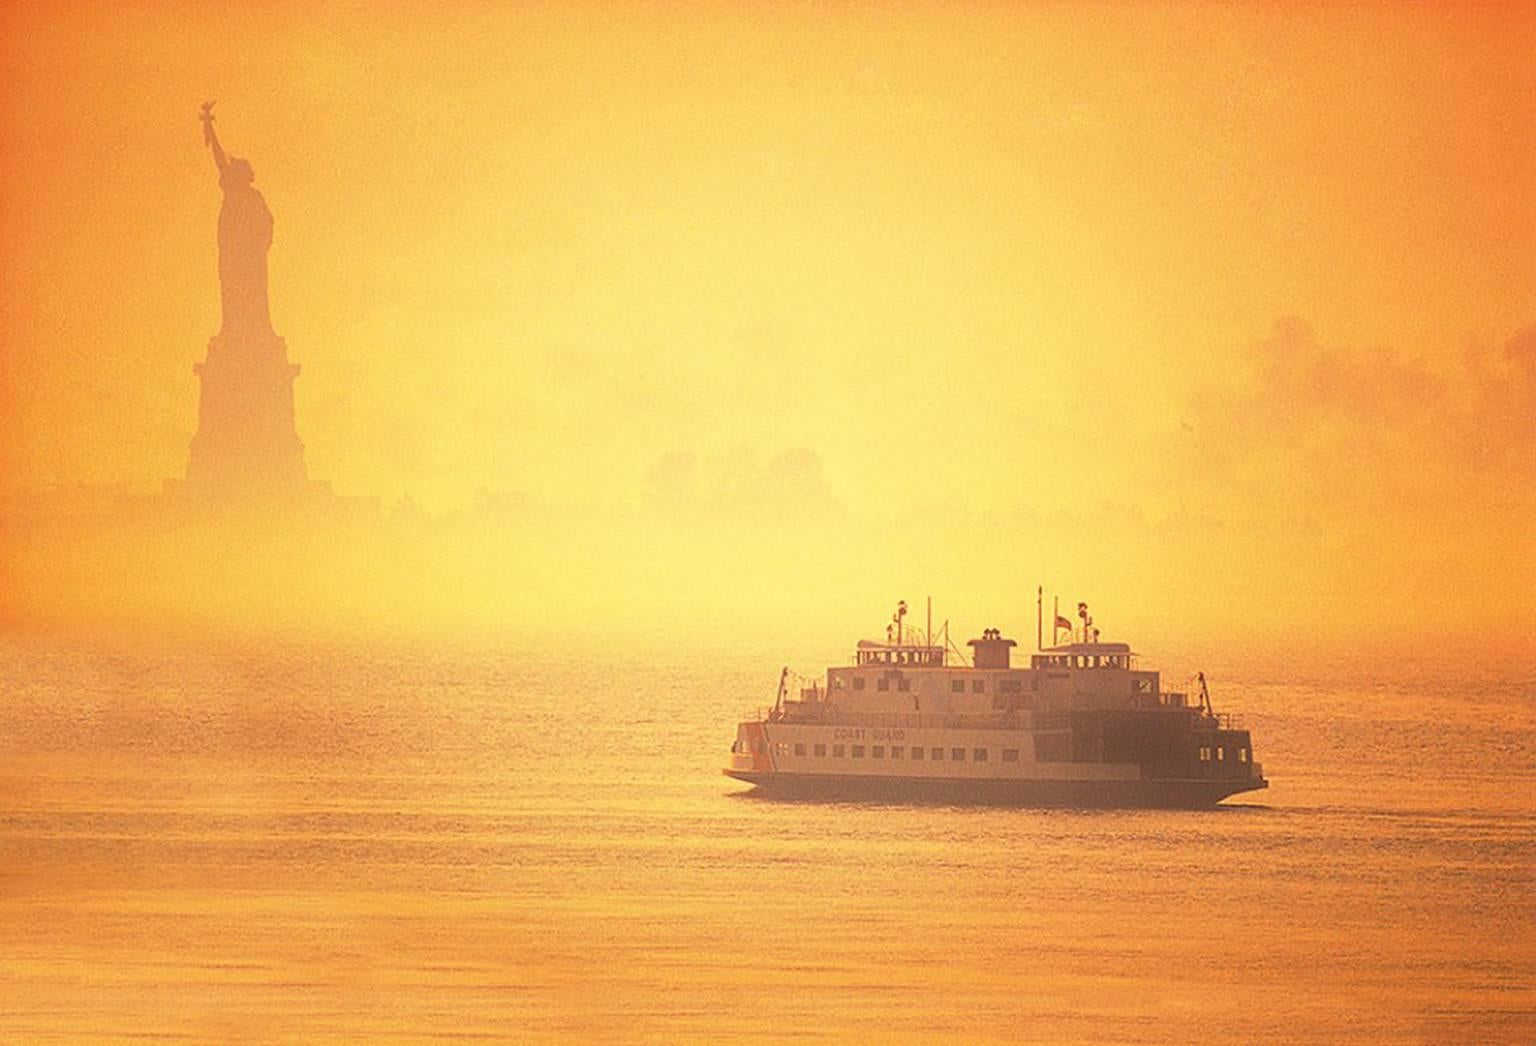 Mitchell Funk Color Photograph - Statue of Liberty and Ferry in Morning Mist 